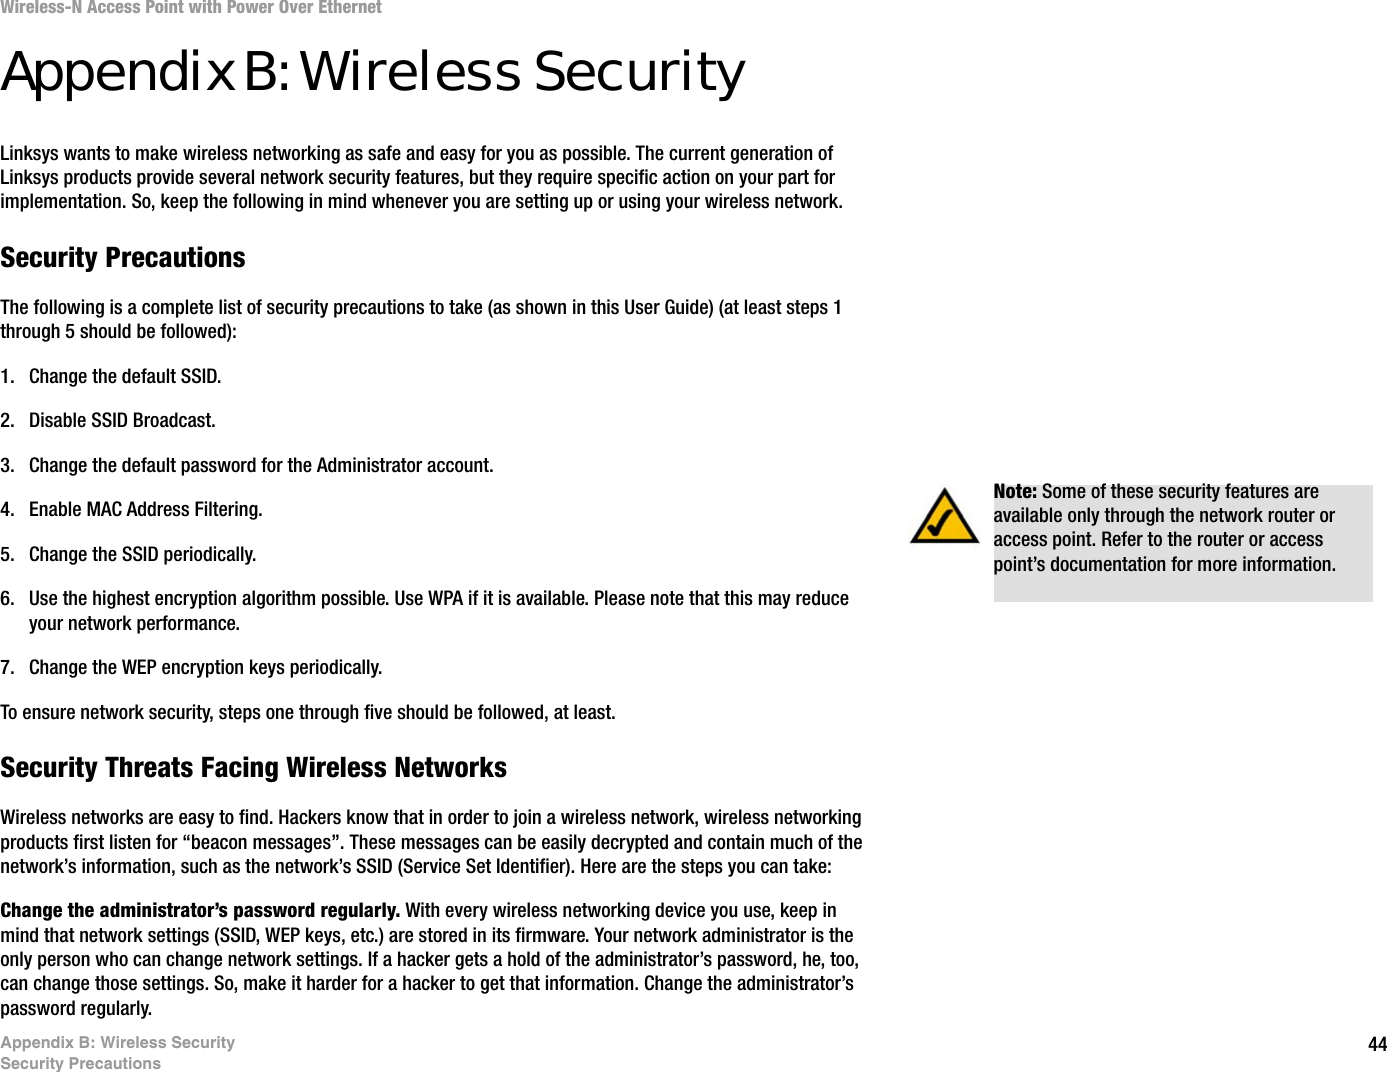 44Appendix B: Wireless SecuritySecurity PrecautionsWireless-N Access Point with Power Over EthernetAppendix B: Wireless SecurityLinksys wants to make wireless networking as safe and easy for you as possible. The current generation of Linksys products provide several network security features, but they require specific action on your part for implementation. So, keep the following in mind whenever you are setting up or using your wireless network.Security PrecautionsThe following is a complete list of security precautions to take (as shown in this User Guide) (at least steps 1 through 5 should be followed):1. Change the default SSID. 2. Disable SSID Broadcast. 3. Change the default password for the Administrator account. 4. Enable MAC Address Filtering. 5. Change the SSID periodically. 6. Use the highest encryption algorithm possible. Use WPA if it is available. Please note that this may reduce your network performance. 7. Change the WEP encryption keys periodically. To ensure network security, steps one through five should be followed, at least.Security Threats Facing Wireless Networks Wireless networks are easy to find. Hackers know that in order to join a wireless network, wireless networking products first listen for “beacon messages”. These messages can be easily decrypted and contain much of the network’s information, such as the network’s SSID (Service Set Identifier). Here are the steps you can take:Change the administrator’s password regularly. With every wireless networking device you use, keep in mind that network settings (SSID, WEP keys, etc.) are stored in its firmware. Your network administrator is the only person who can change network settings. If a hacker gets a hold of the administrator’s password, he, too, can change those settings. So, make it harder for a hacker to get that information. Change the administrator’s password regularly.Note: Some of these security features are available only through the network router or access point. Refer to the router or access point’s documentation for more information.